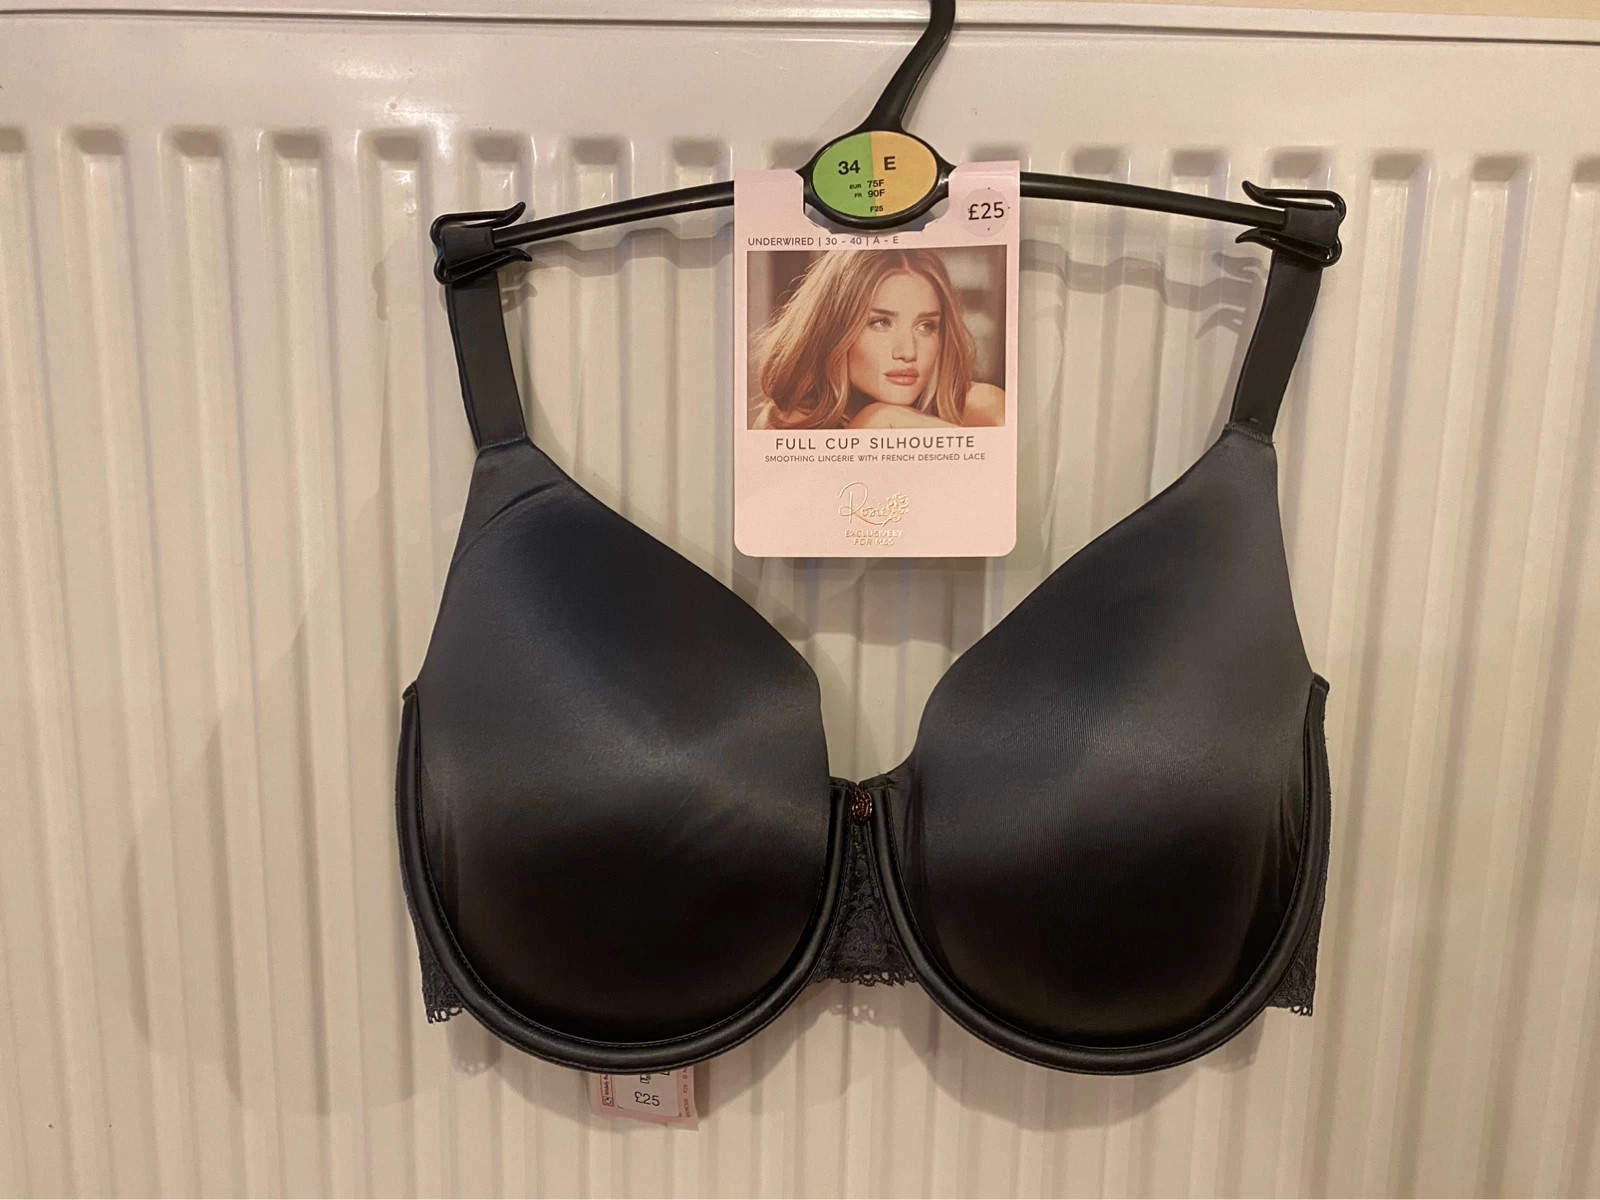 FULL CUP SILHOUETTE BRA SIZE 32D From ROSIE @ M&S BNWT RRP £25